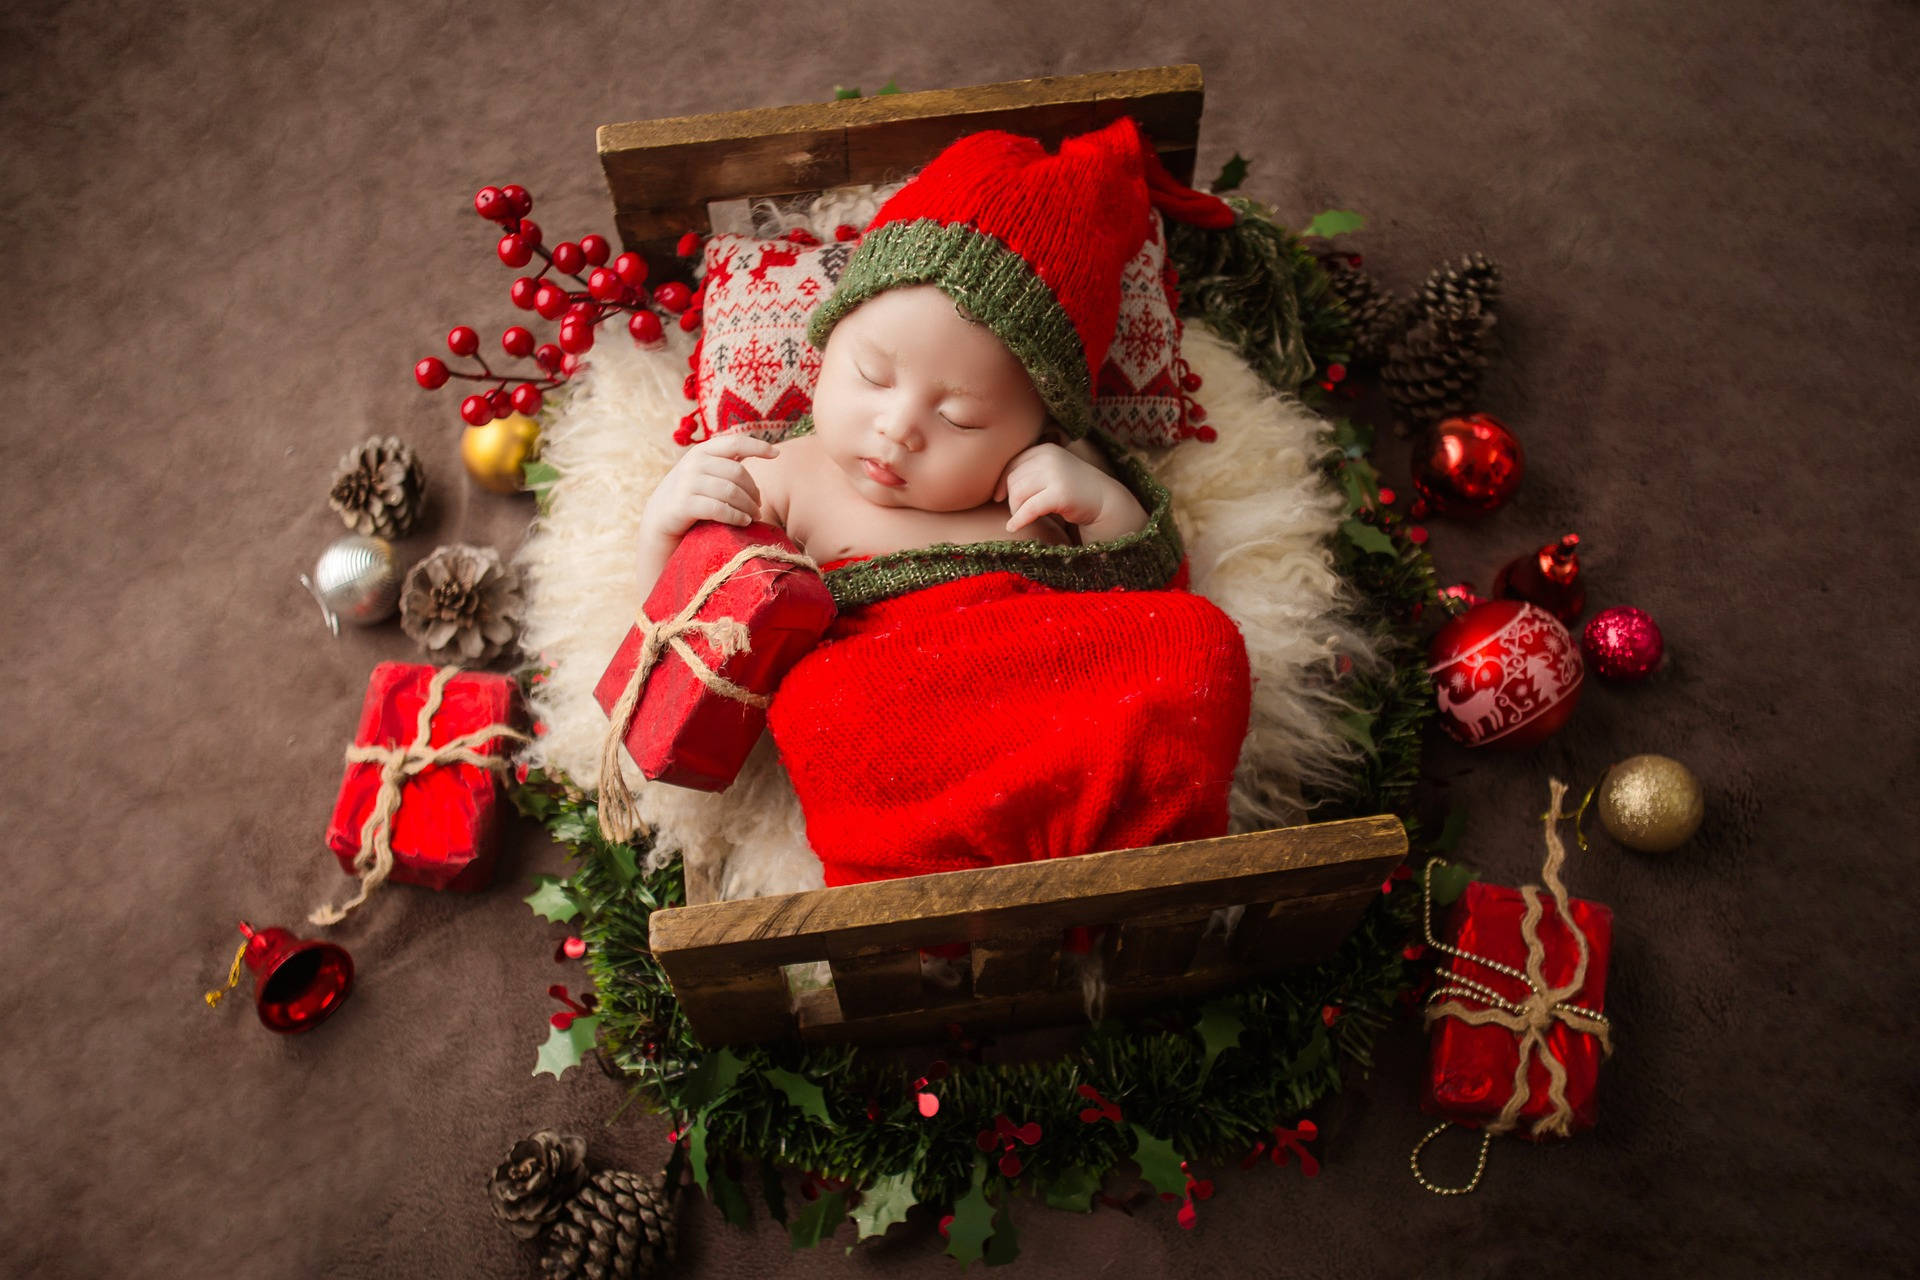 Very Cute Baby In Christmas Outfit Background